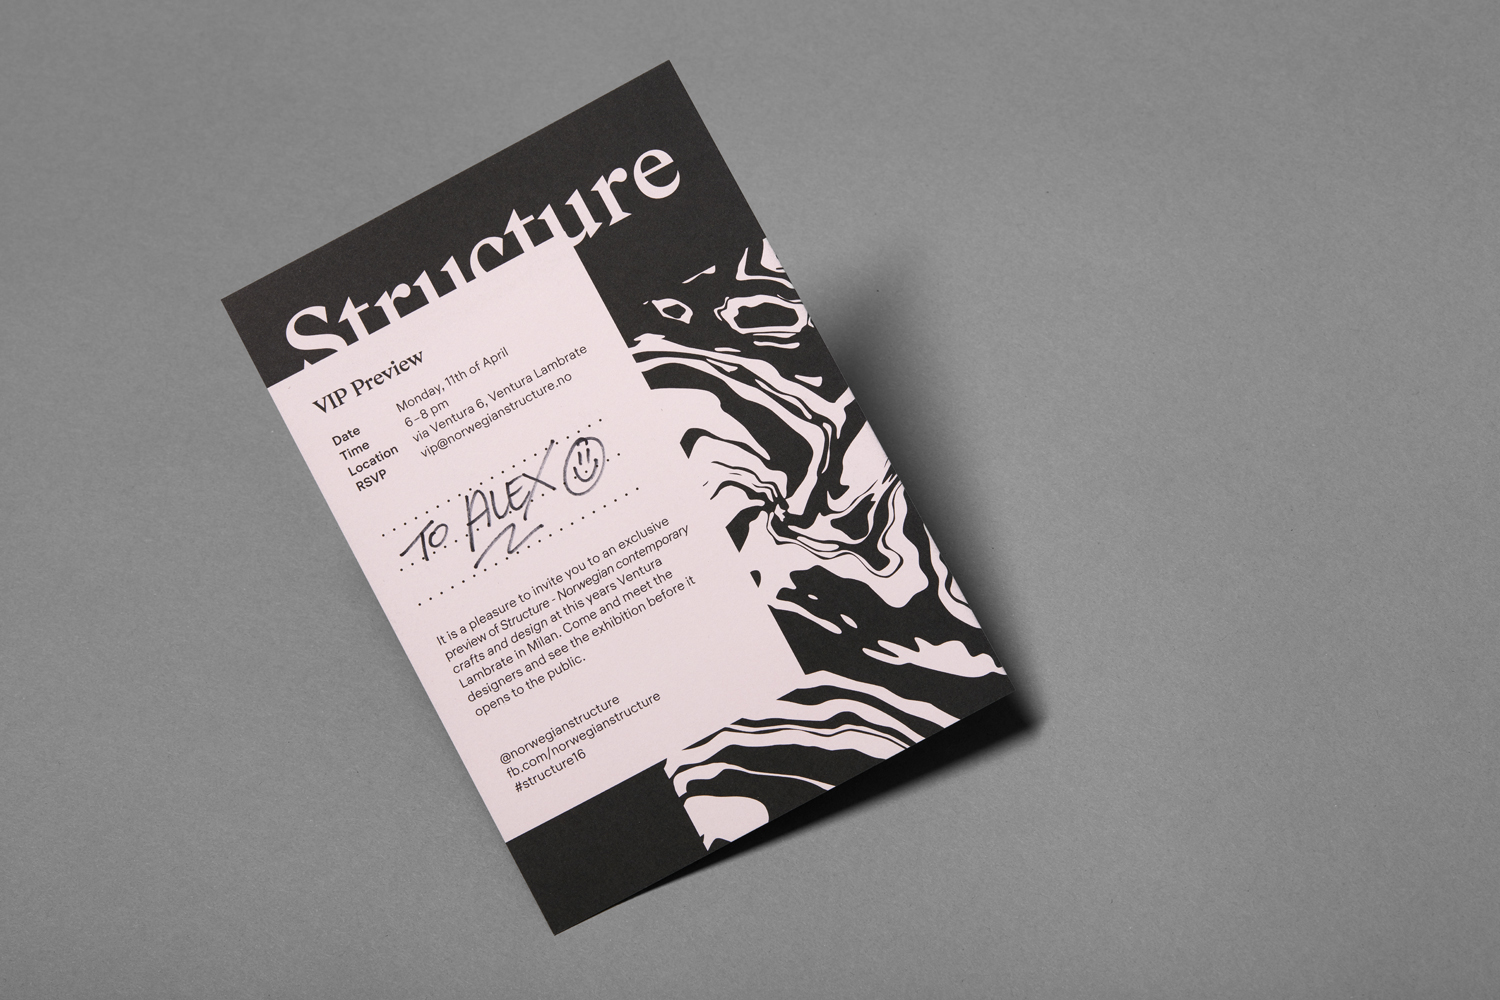 Logo, branding and print by Oslo-based studio Bielke & Yang for contemporary crafts and design exhibition Norwegian Structure